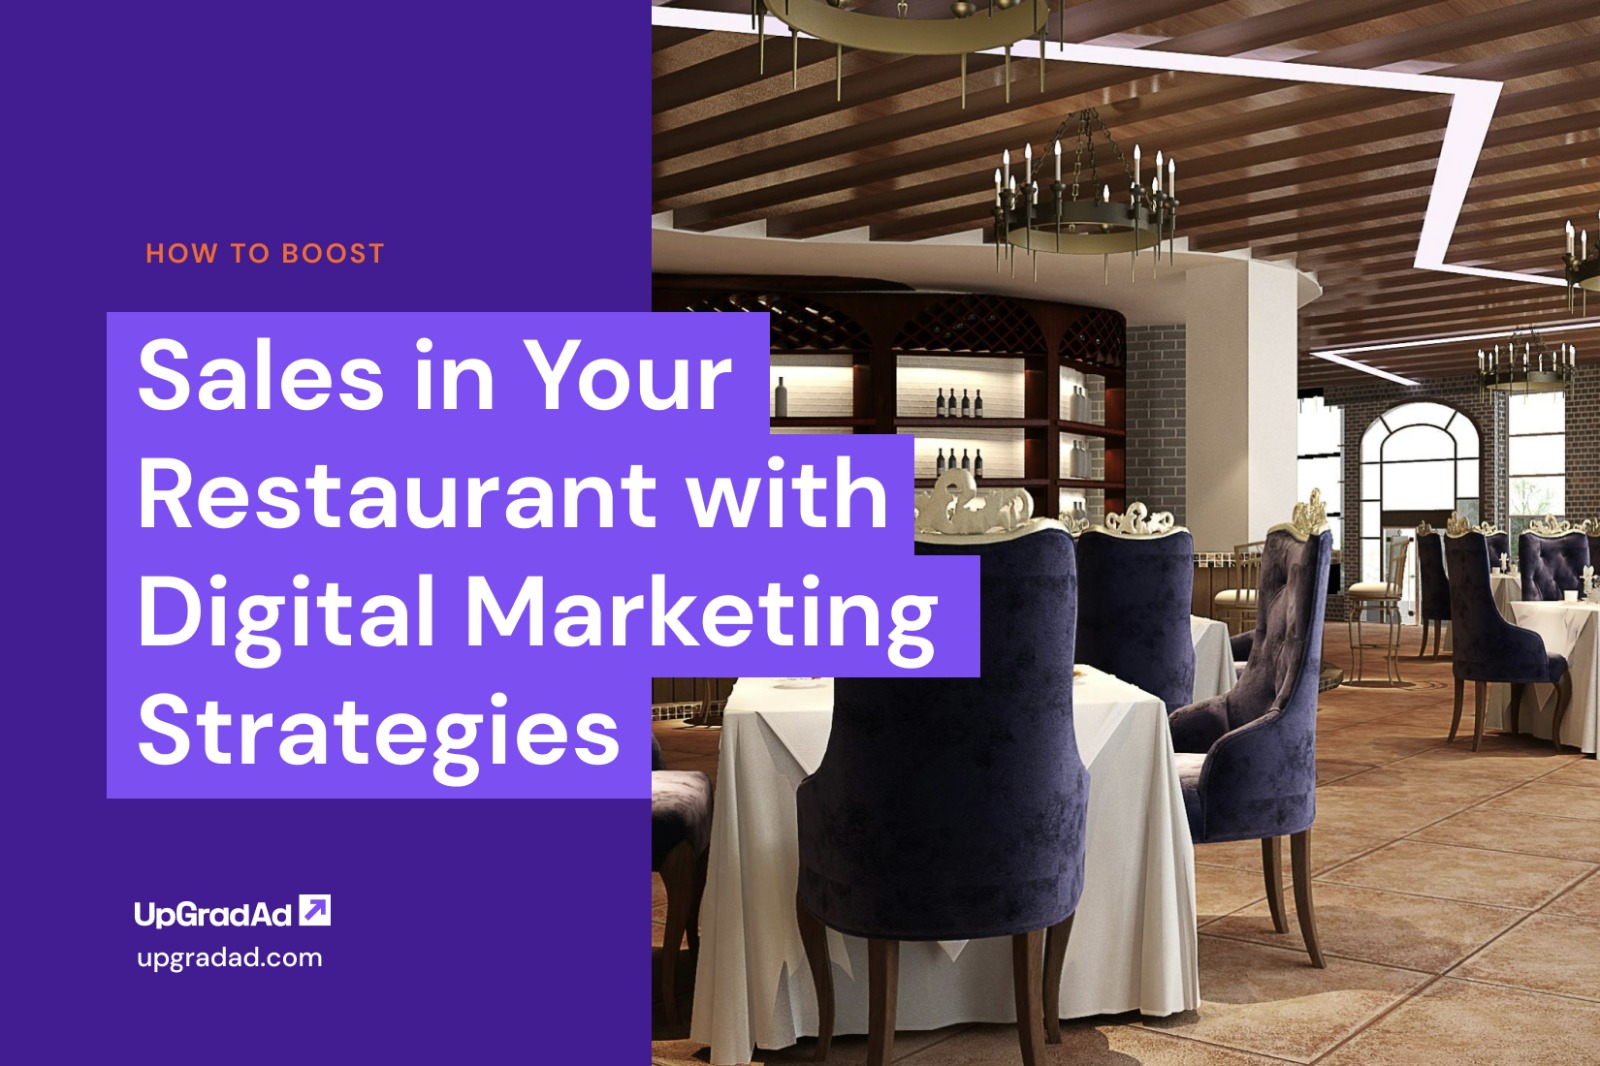 How to Boost Sales in Your Restaurant with Digital Marketing Strategies - UpGradAd